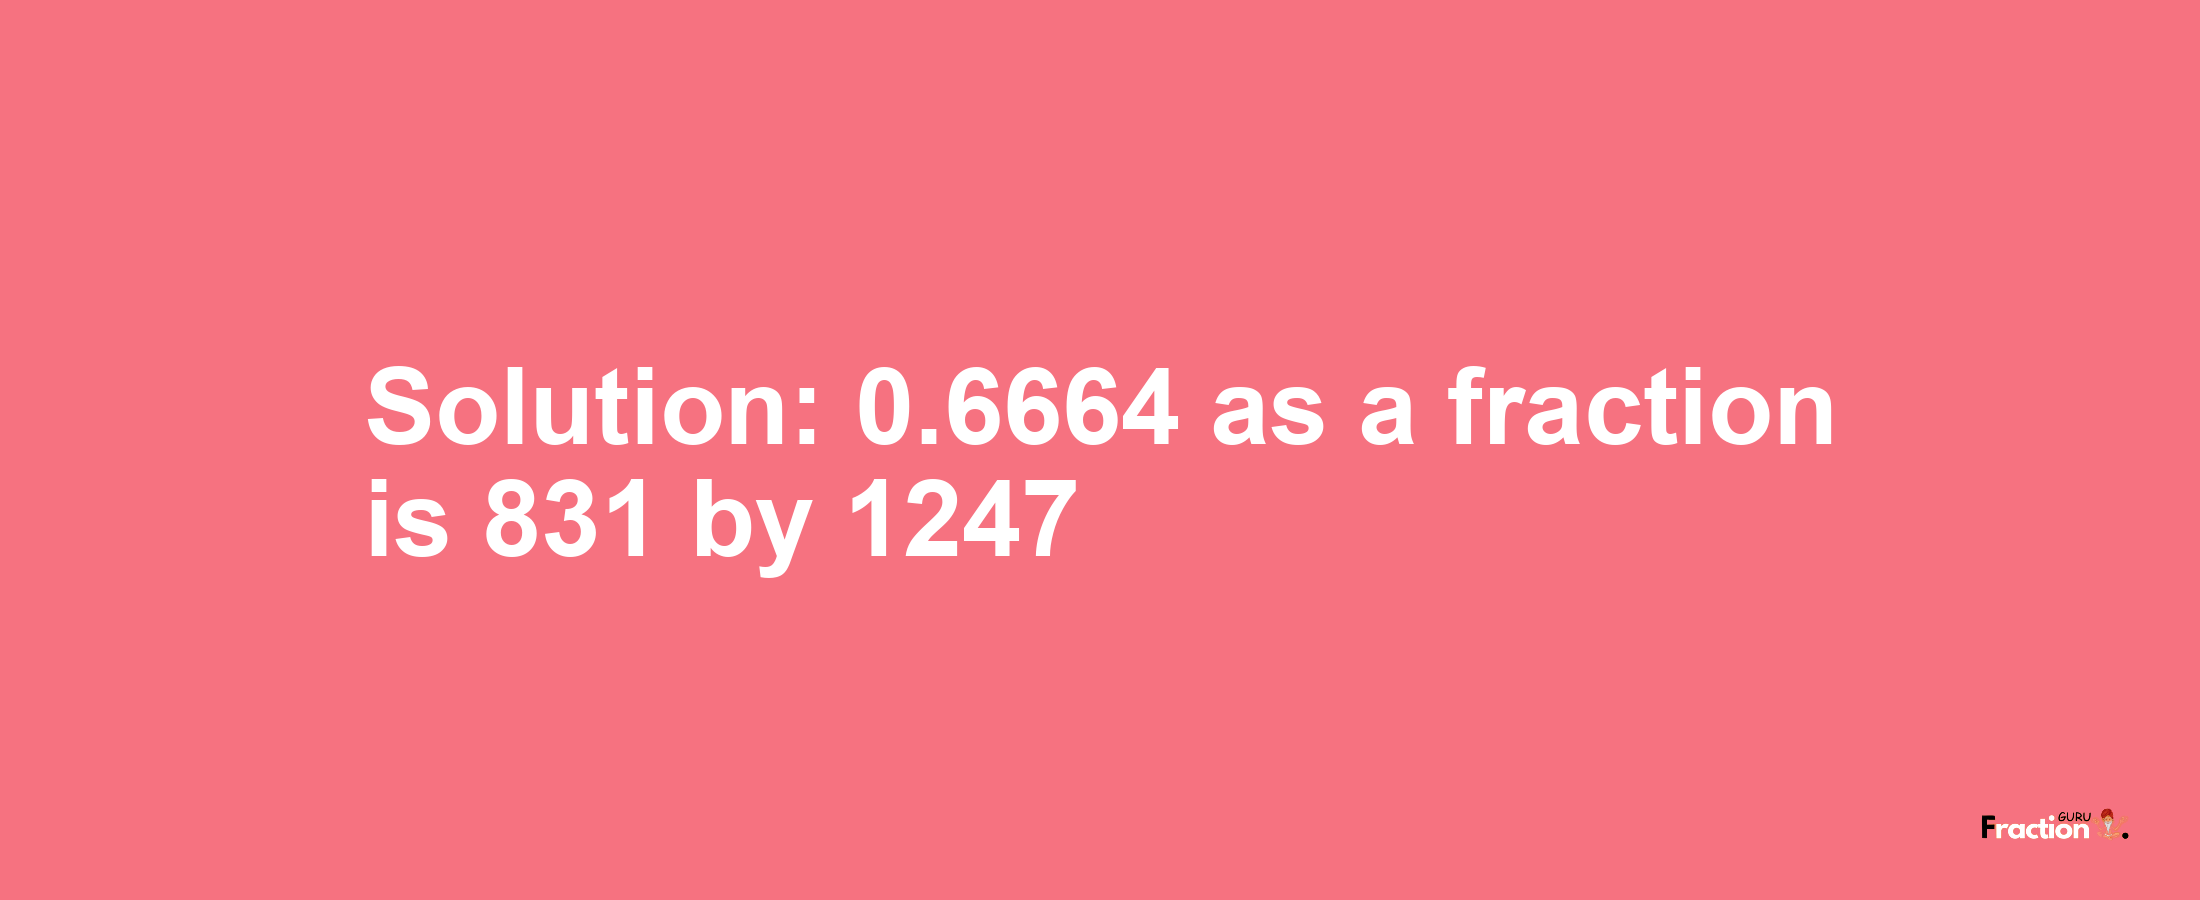 Solution:0.6664 as a fraction is 831/1247